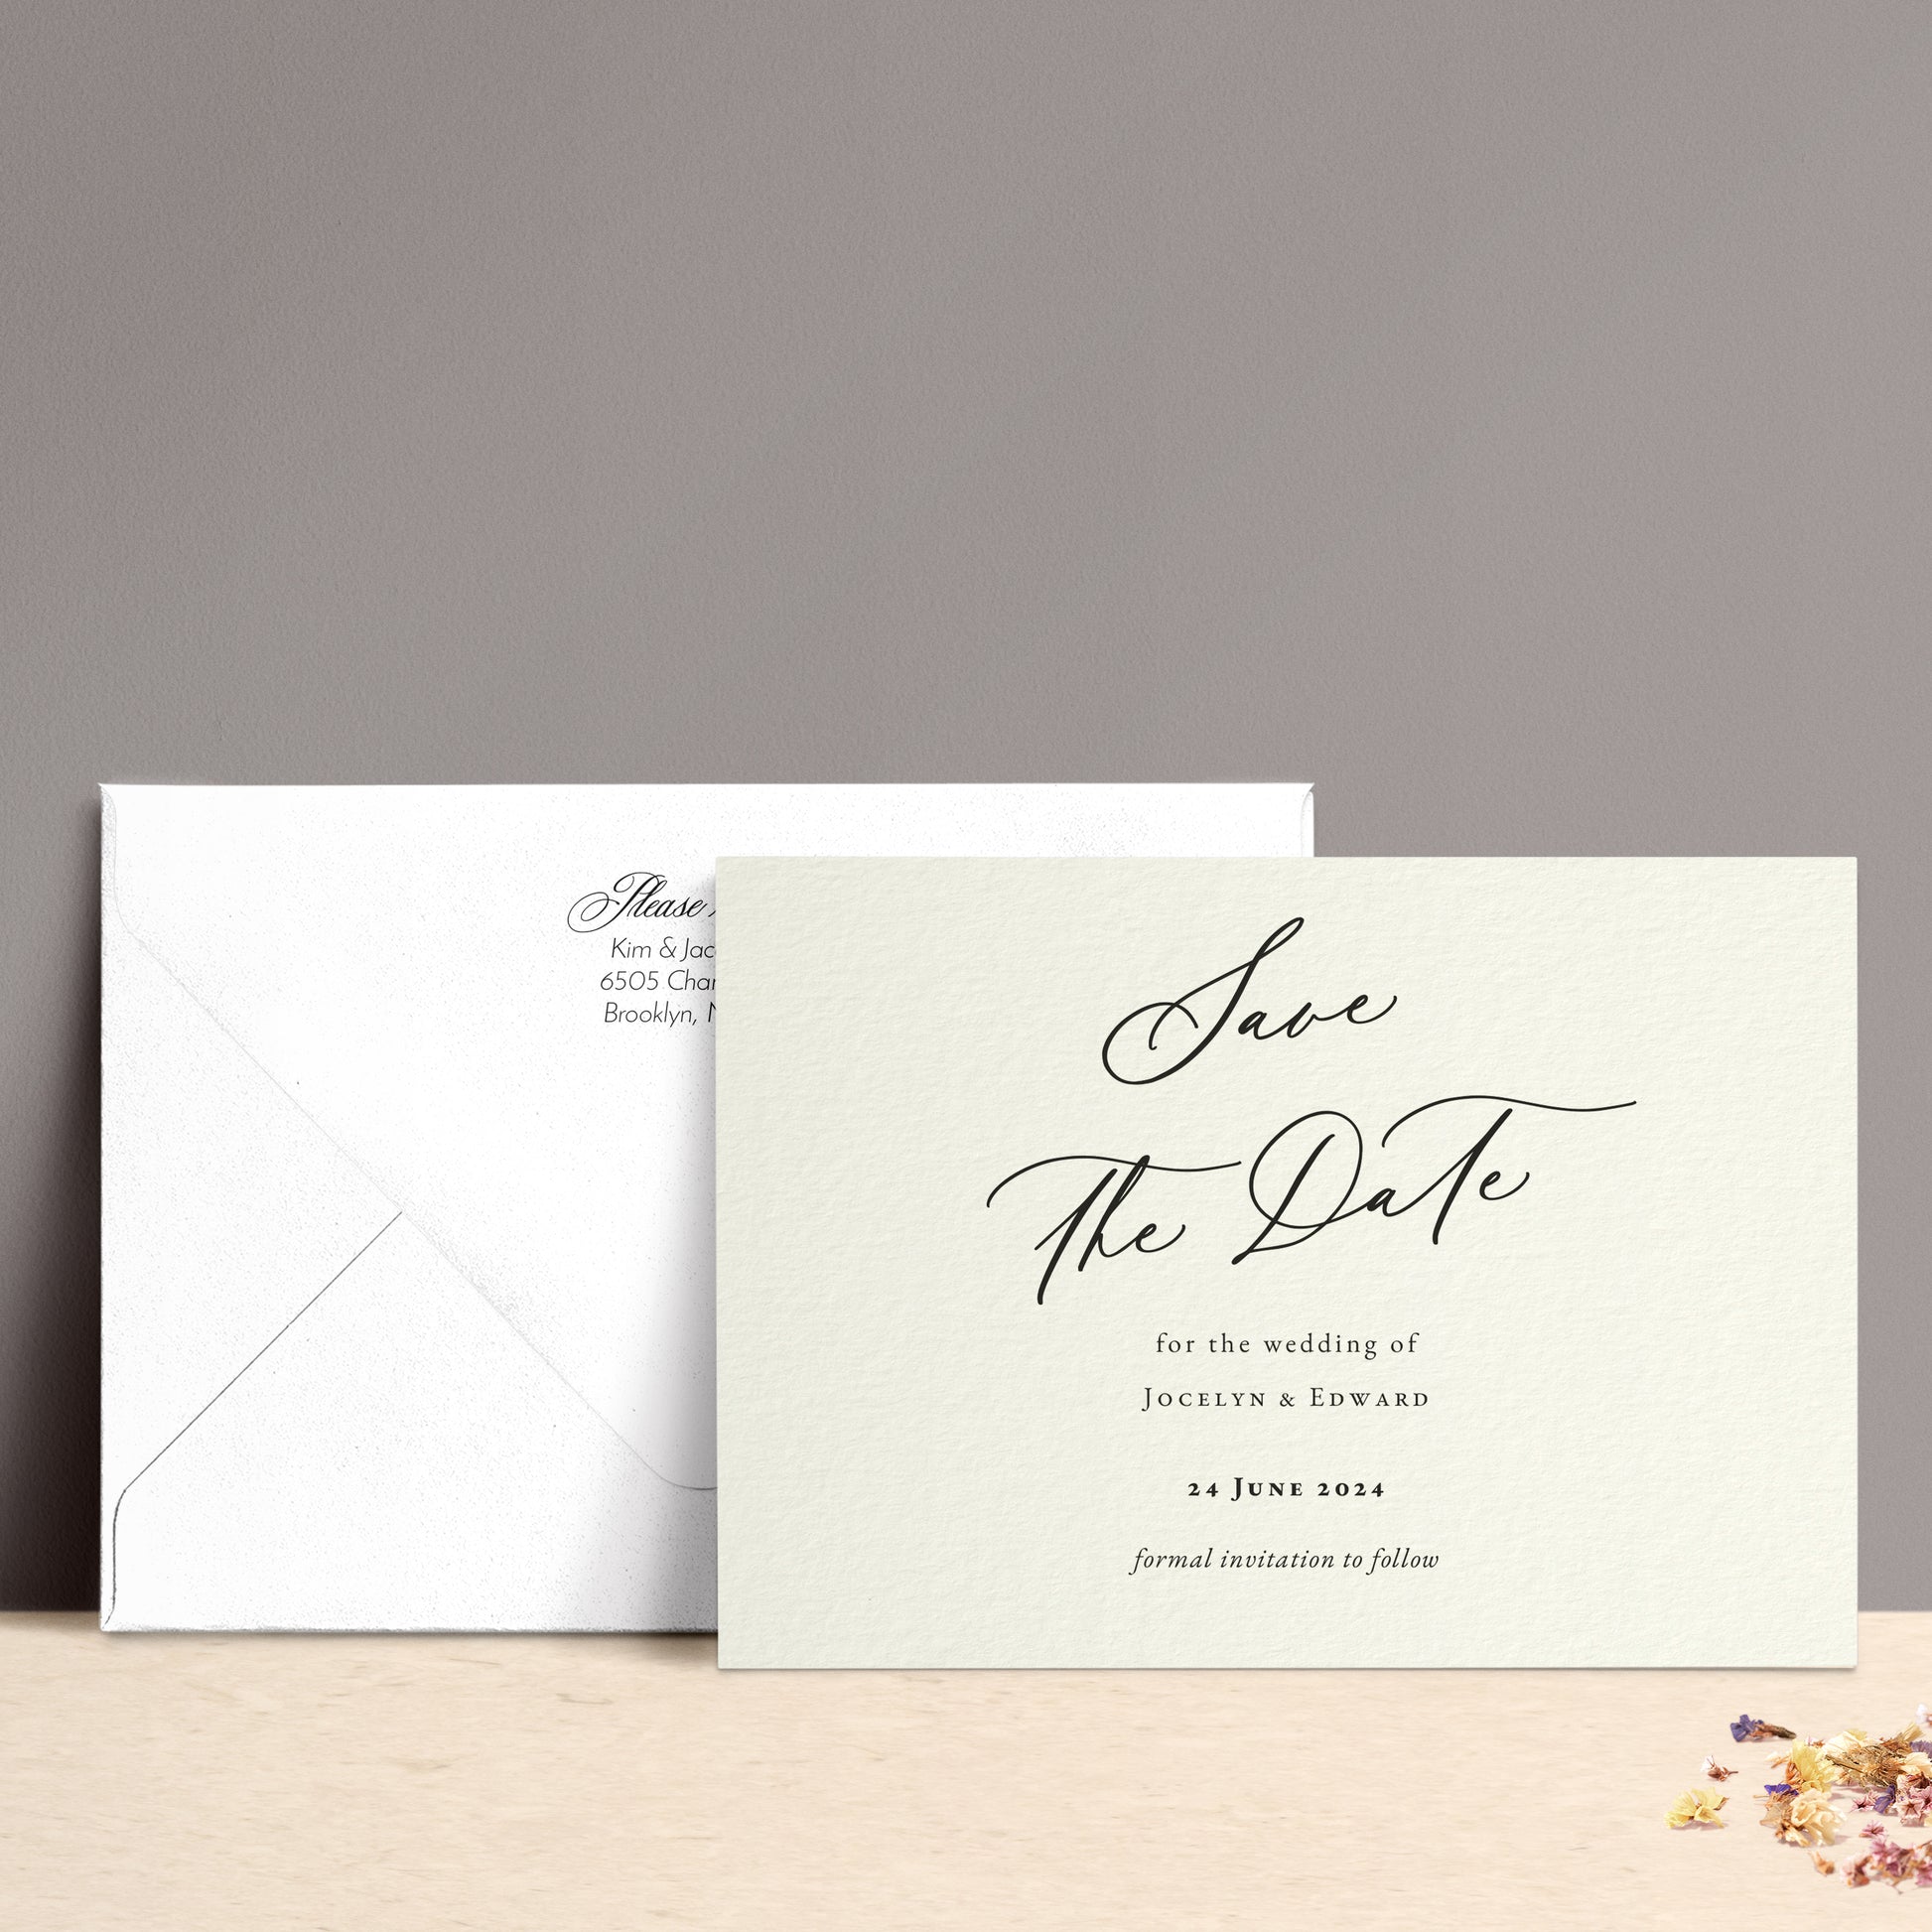 elegant wedding save the date cards with calligraphy font - XOXOKristen